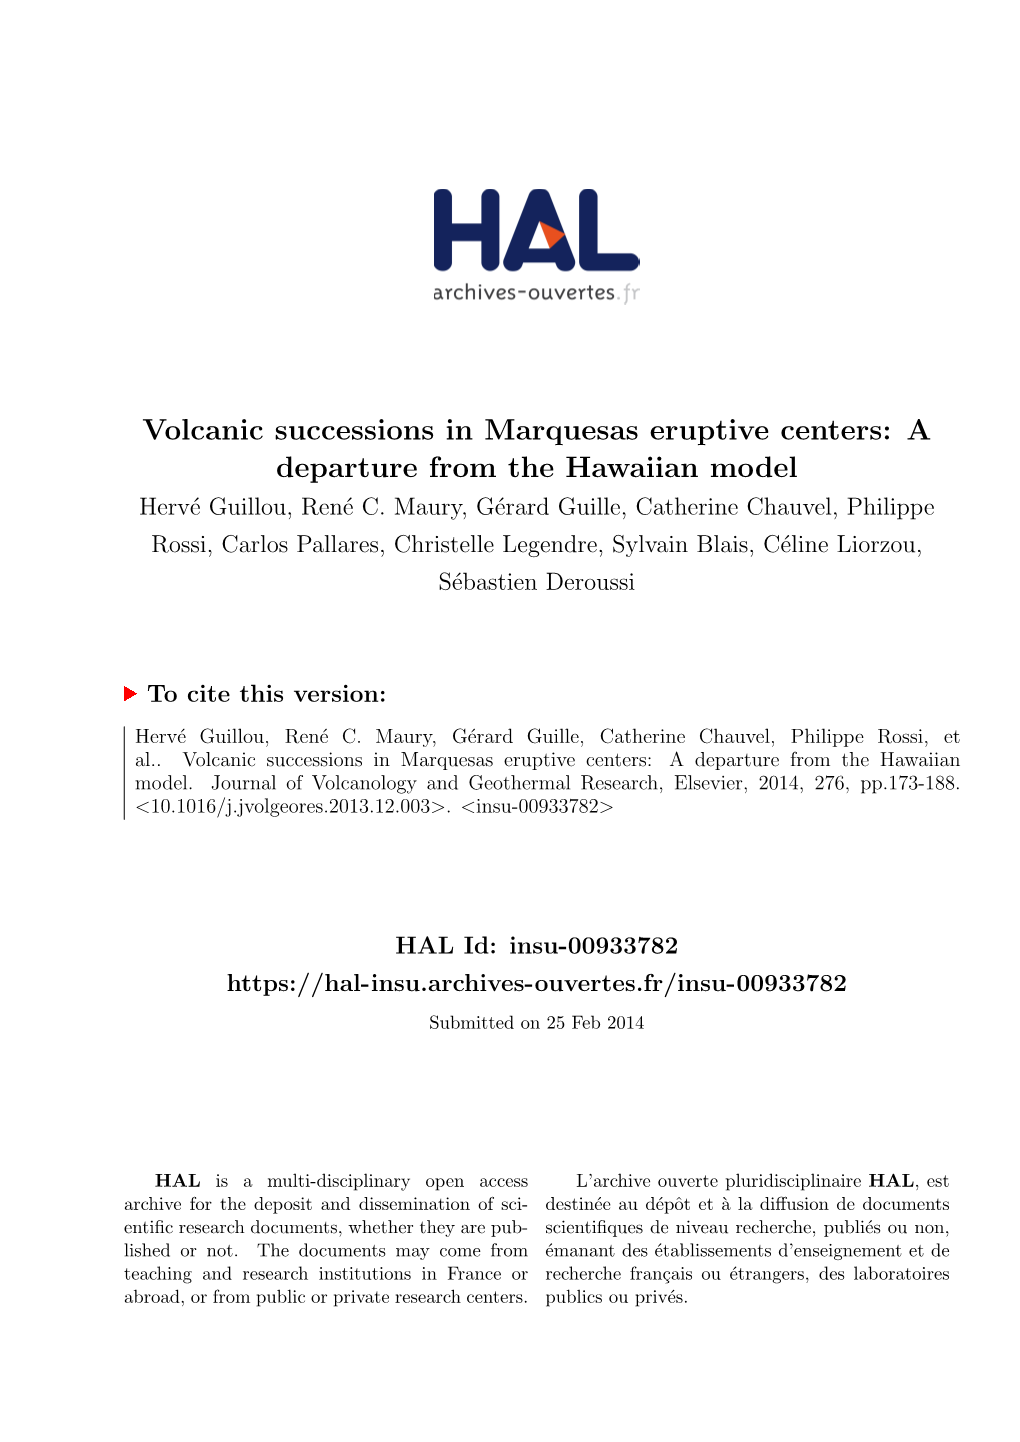 Volcanic Successions in Marquesas Eruptive Centers: a Departure from the Hawaiian Model Herv´Eguillou, Ren´Ec